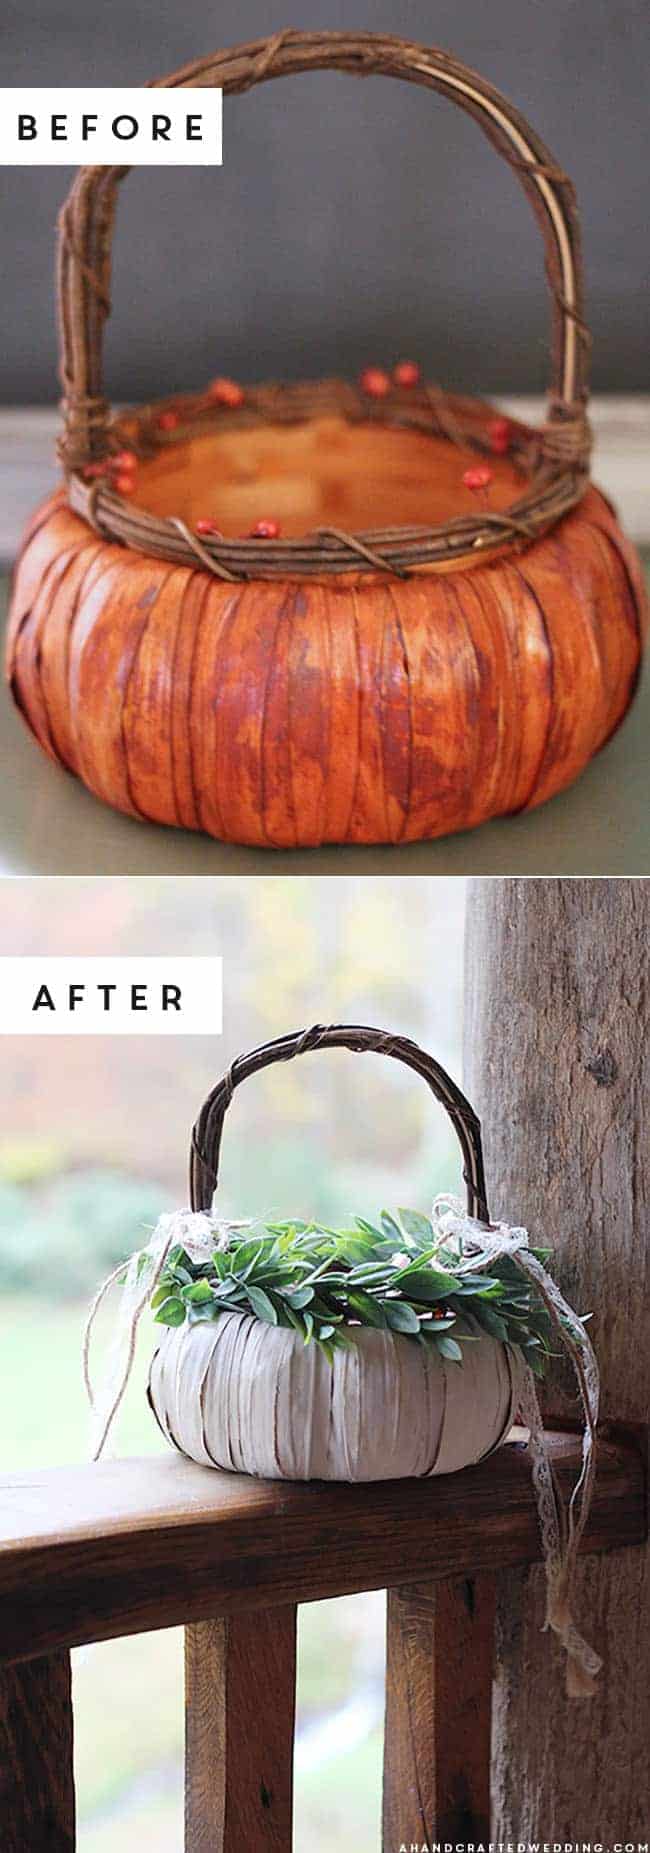 Planning a fall wedding? Add a whimsical touch with this DIY pumpkin flower girl basket! MountainModernLife.com